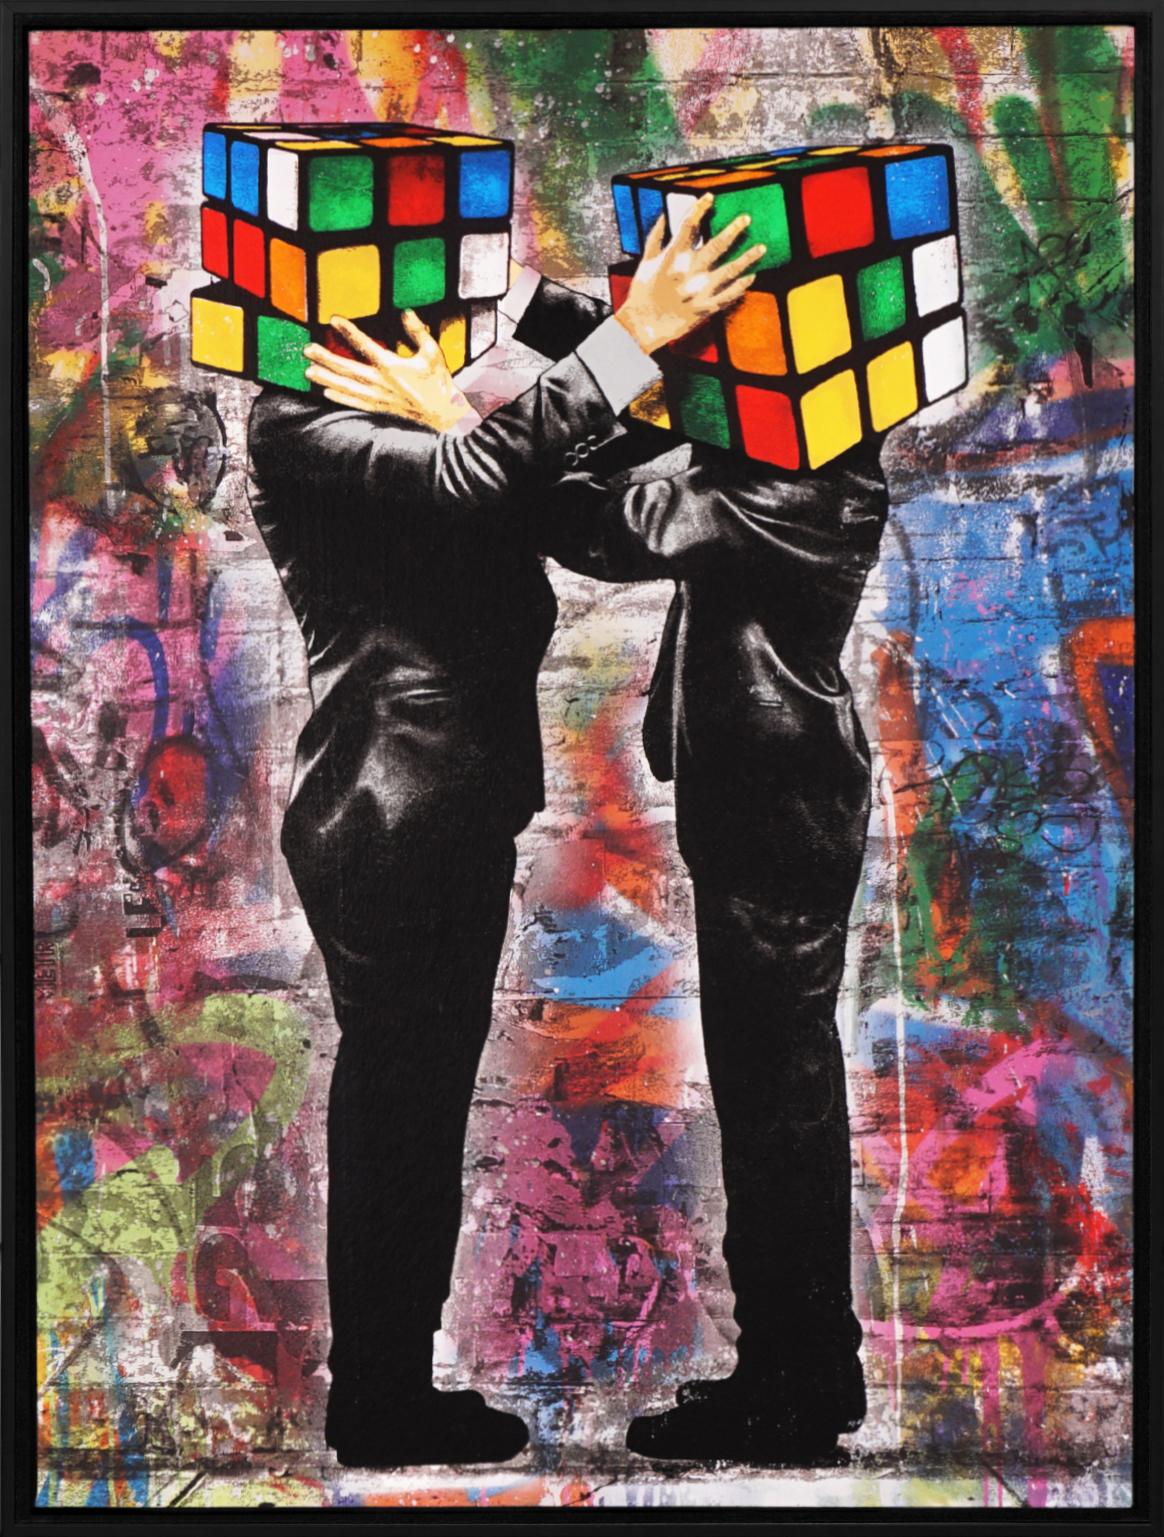 'Puzzled IV' by Hijack is a silkscreen and mixed media work on canvas, created in 2020. Signed by the Artist, this work possesses striking subject matter and the street-style flair Hijack has become well-known for. ‘Puzzled IV’ comes in a custom